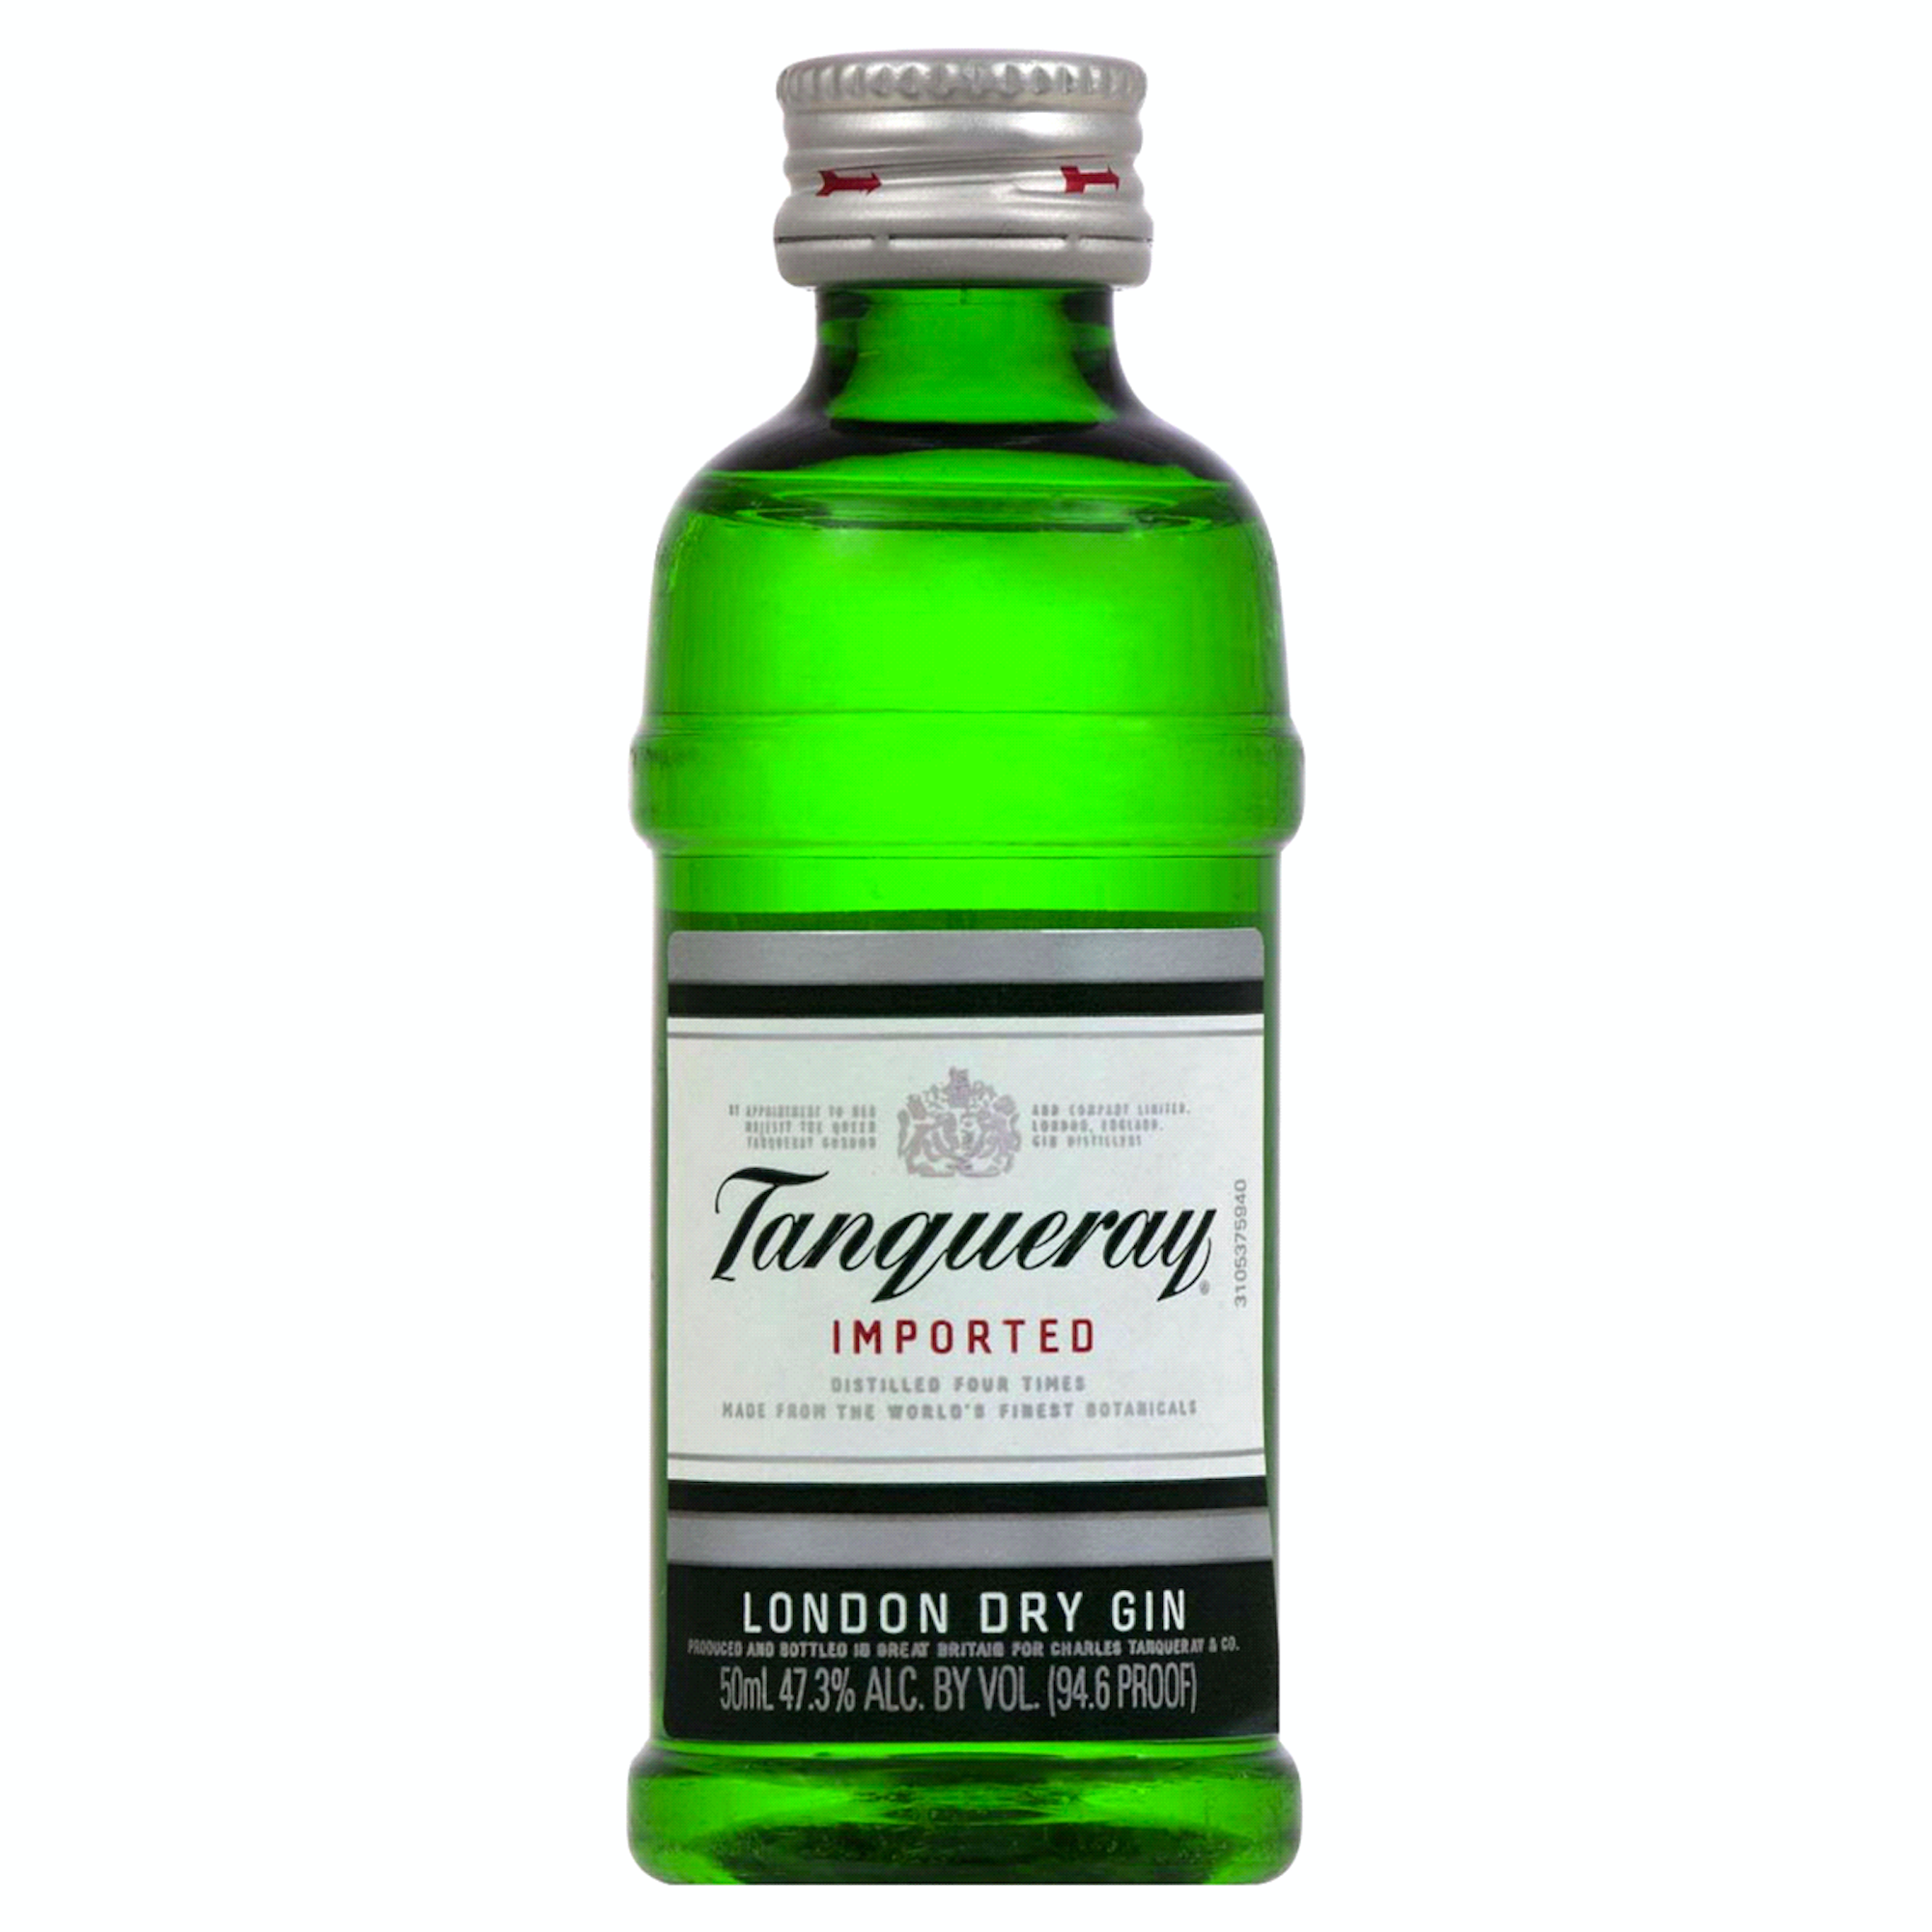 Tanqueray London Dry Gin 50ml Sleeve (12 bottles)